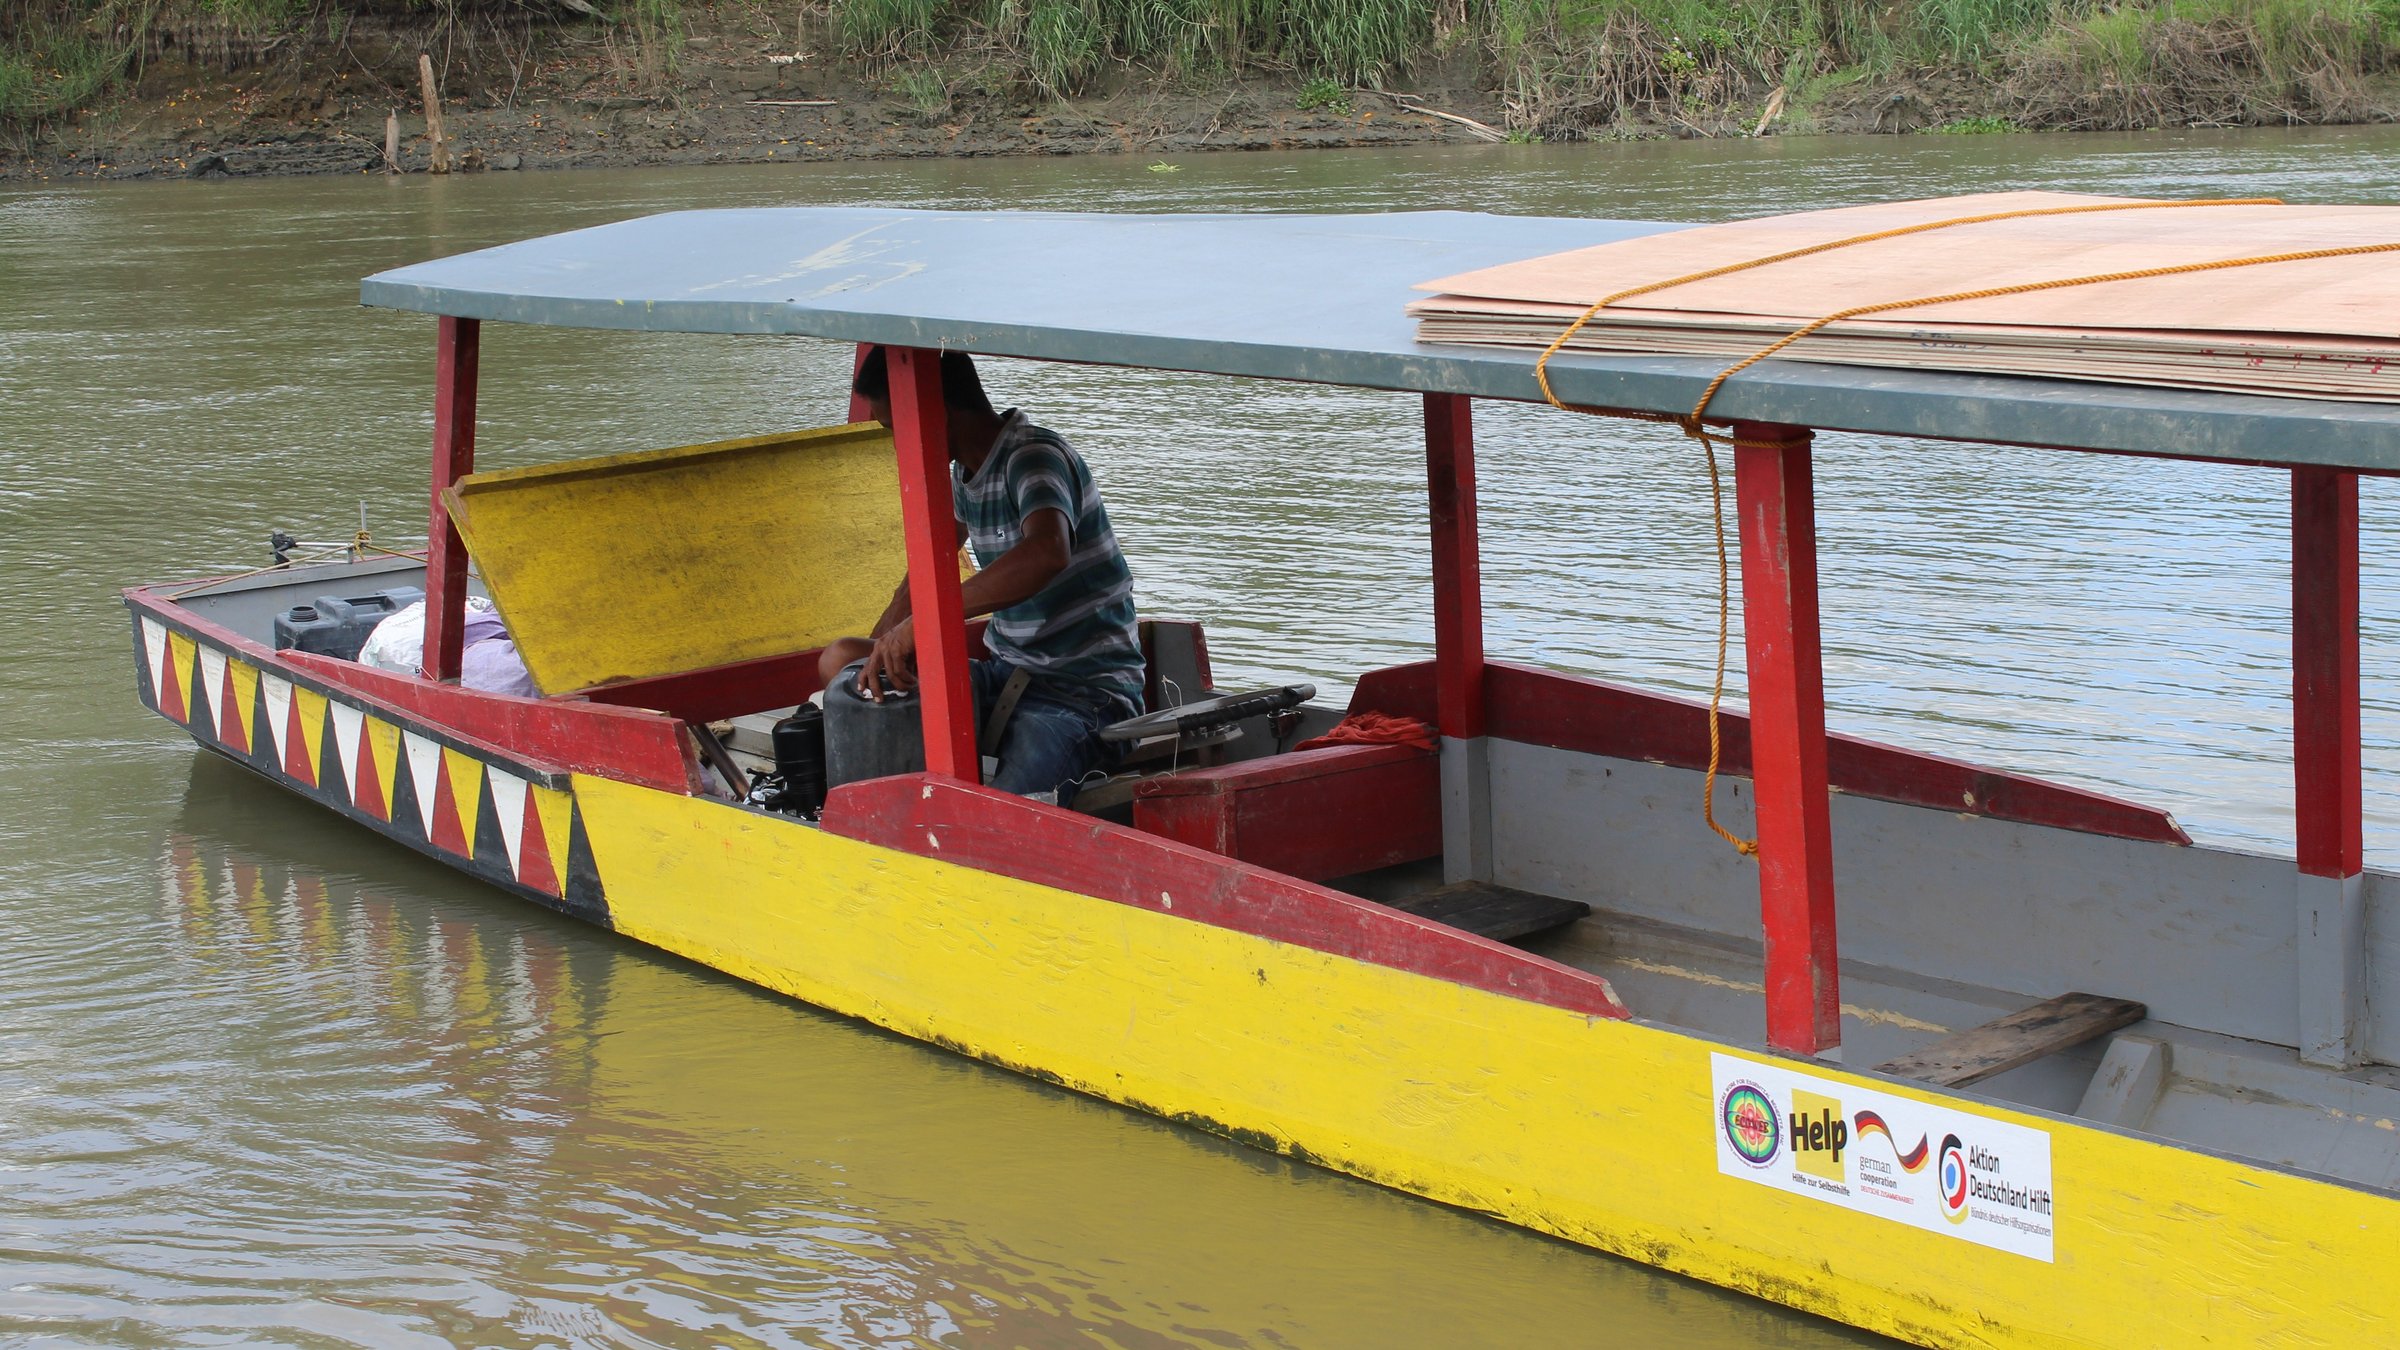 Boat for fishing and transporting harvests